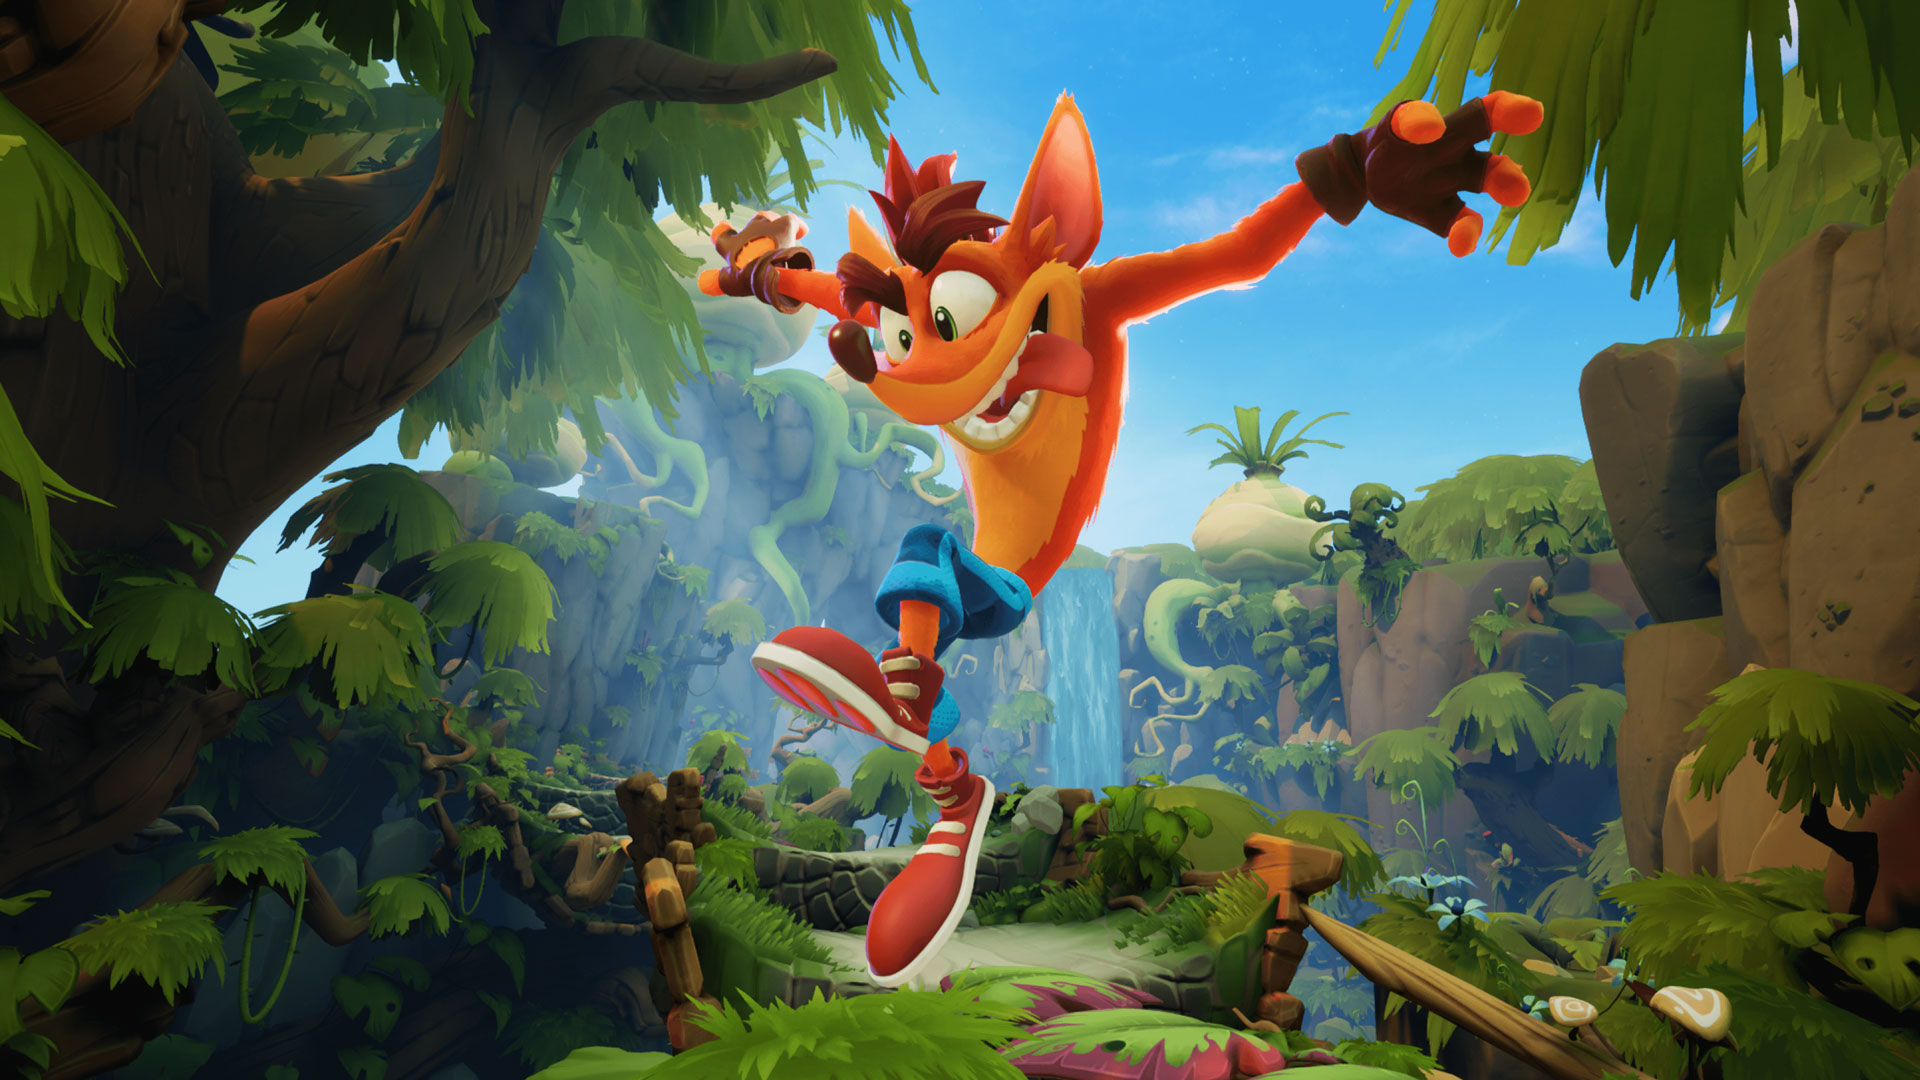 Whoa Crash Bandicoot 4 Its About Time Demo Available This Weekend